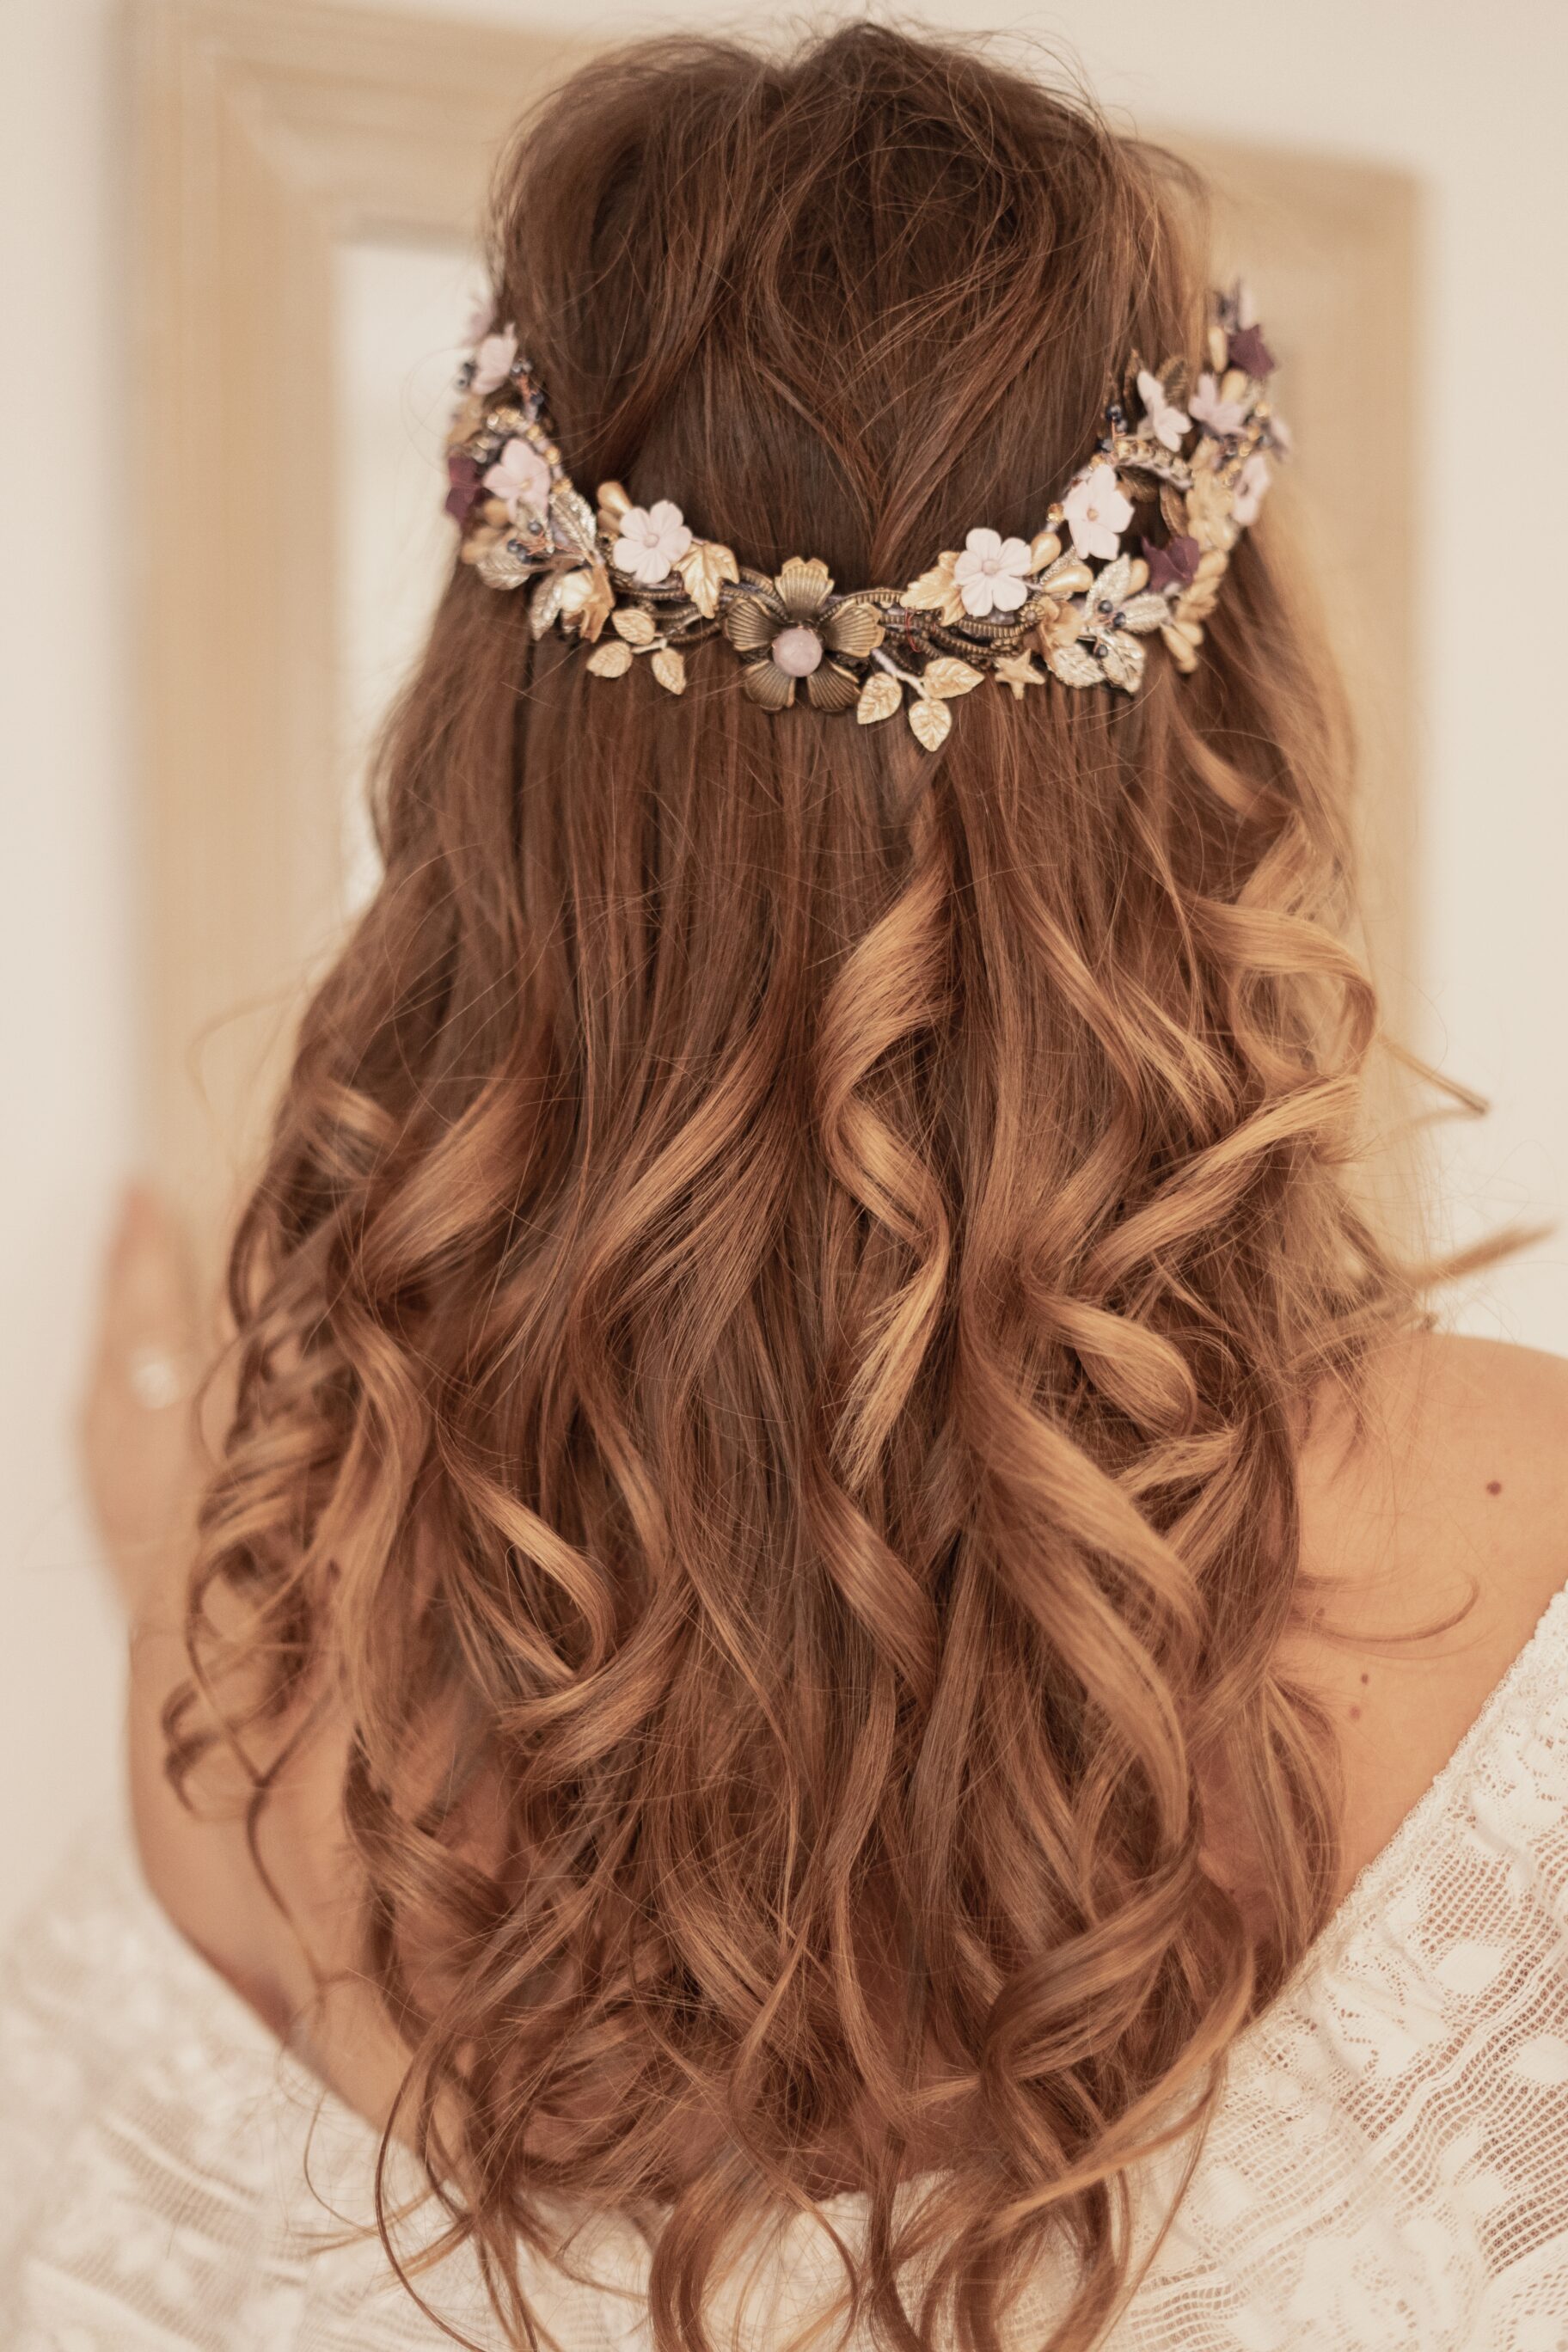 Loose Curls With Flower Crown